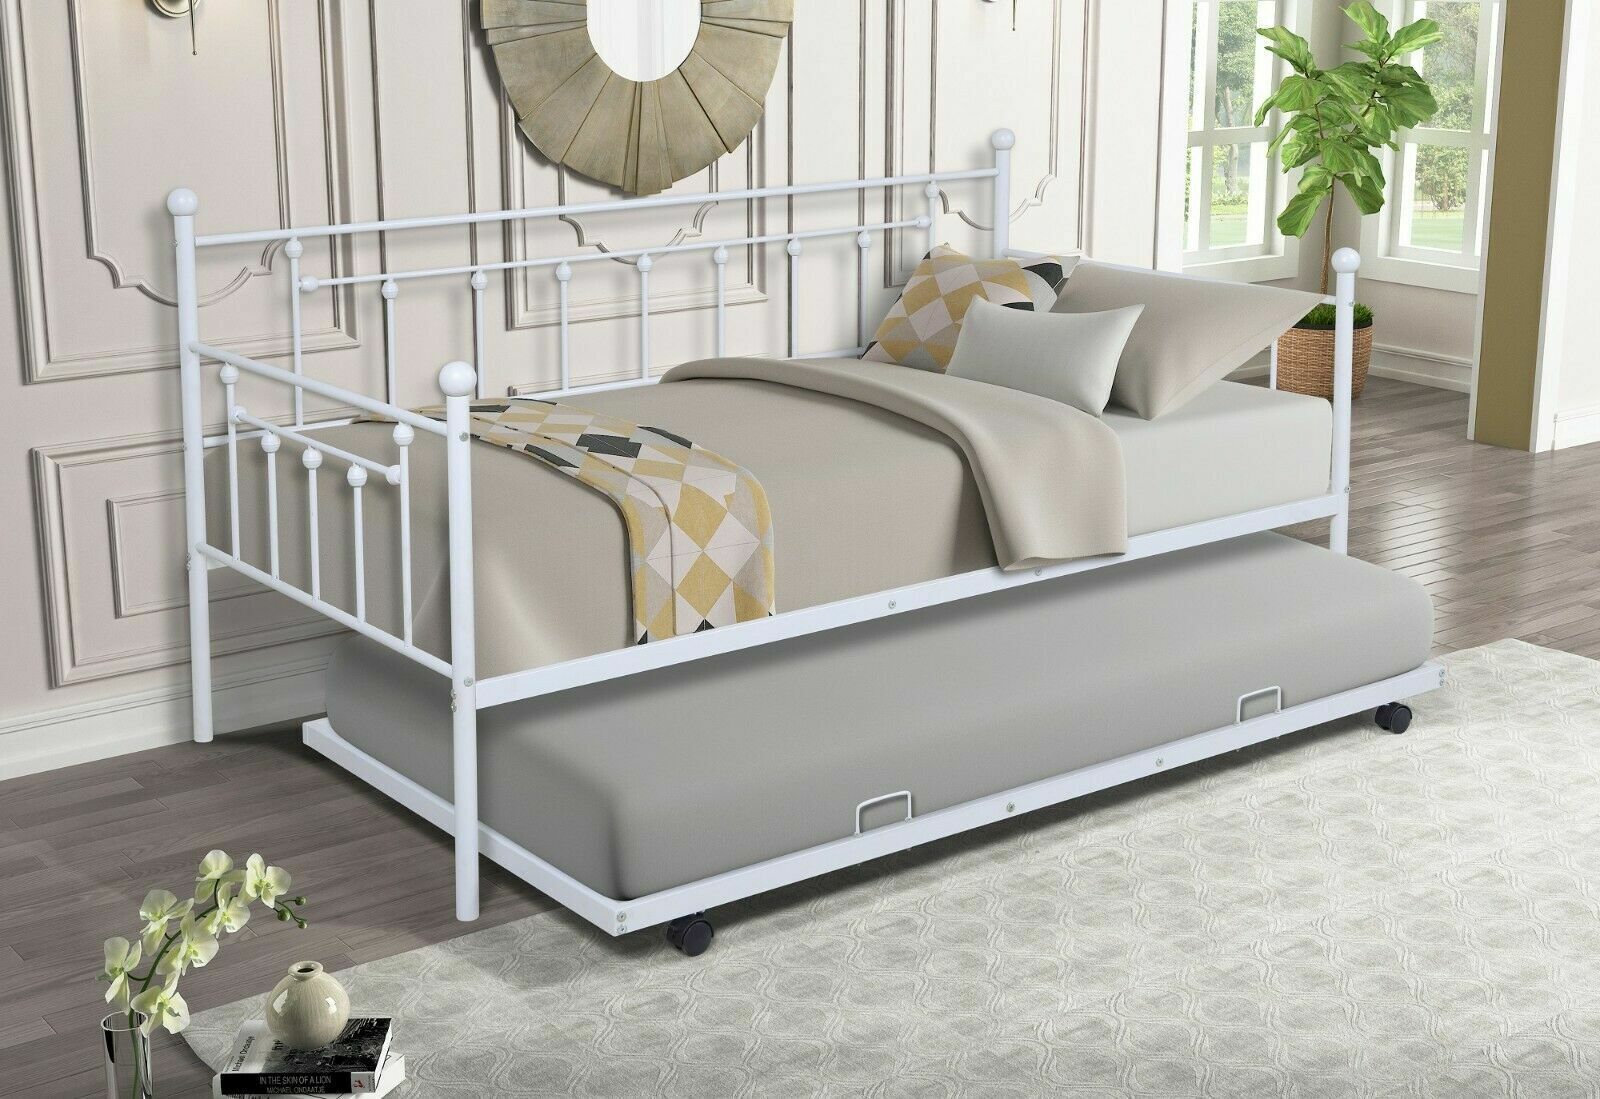 Metal Frame Daybed with Trundle Bedroom Furniture Space Saving For Kids Adults Fetines Does Not Apply